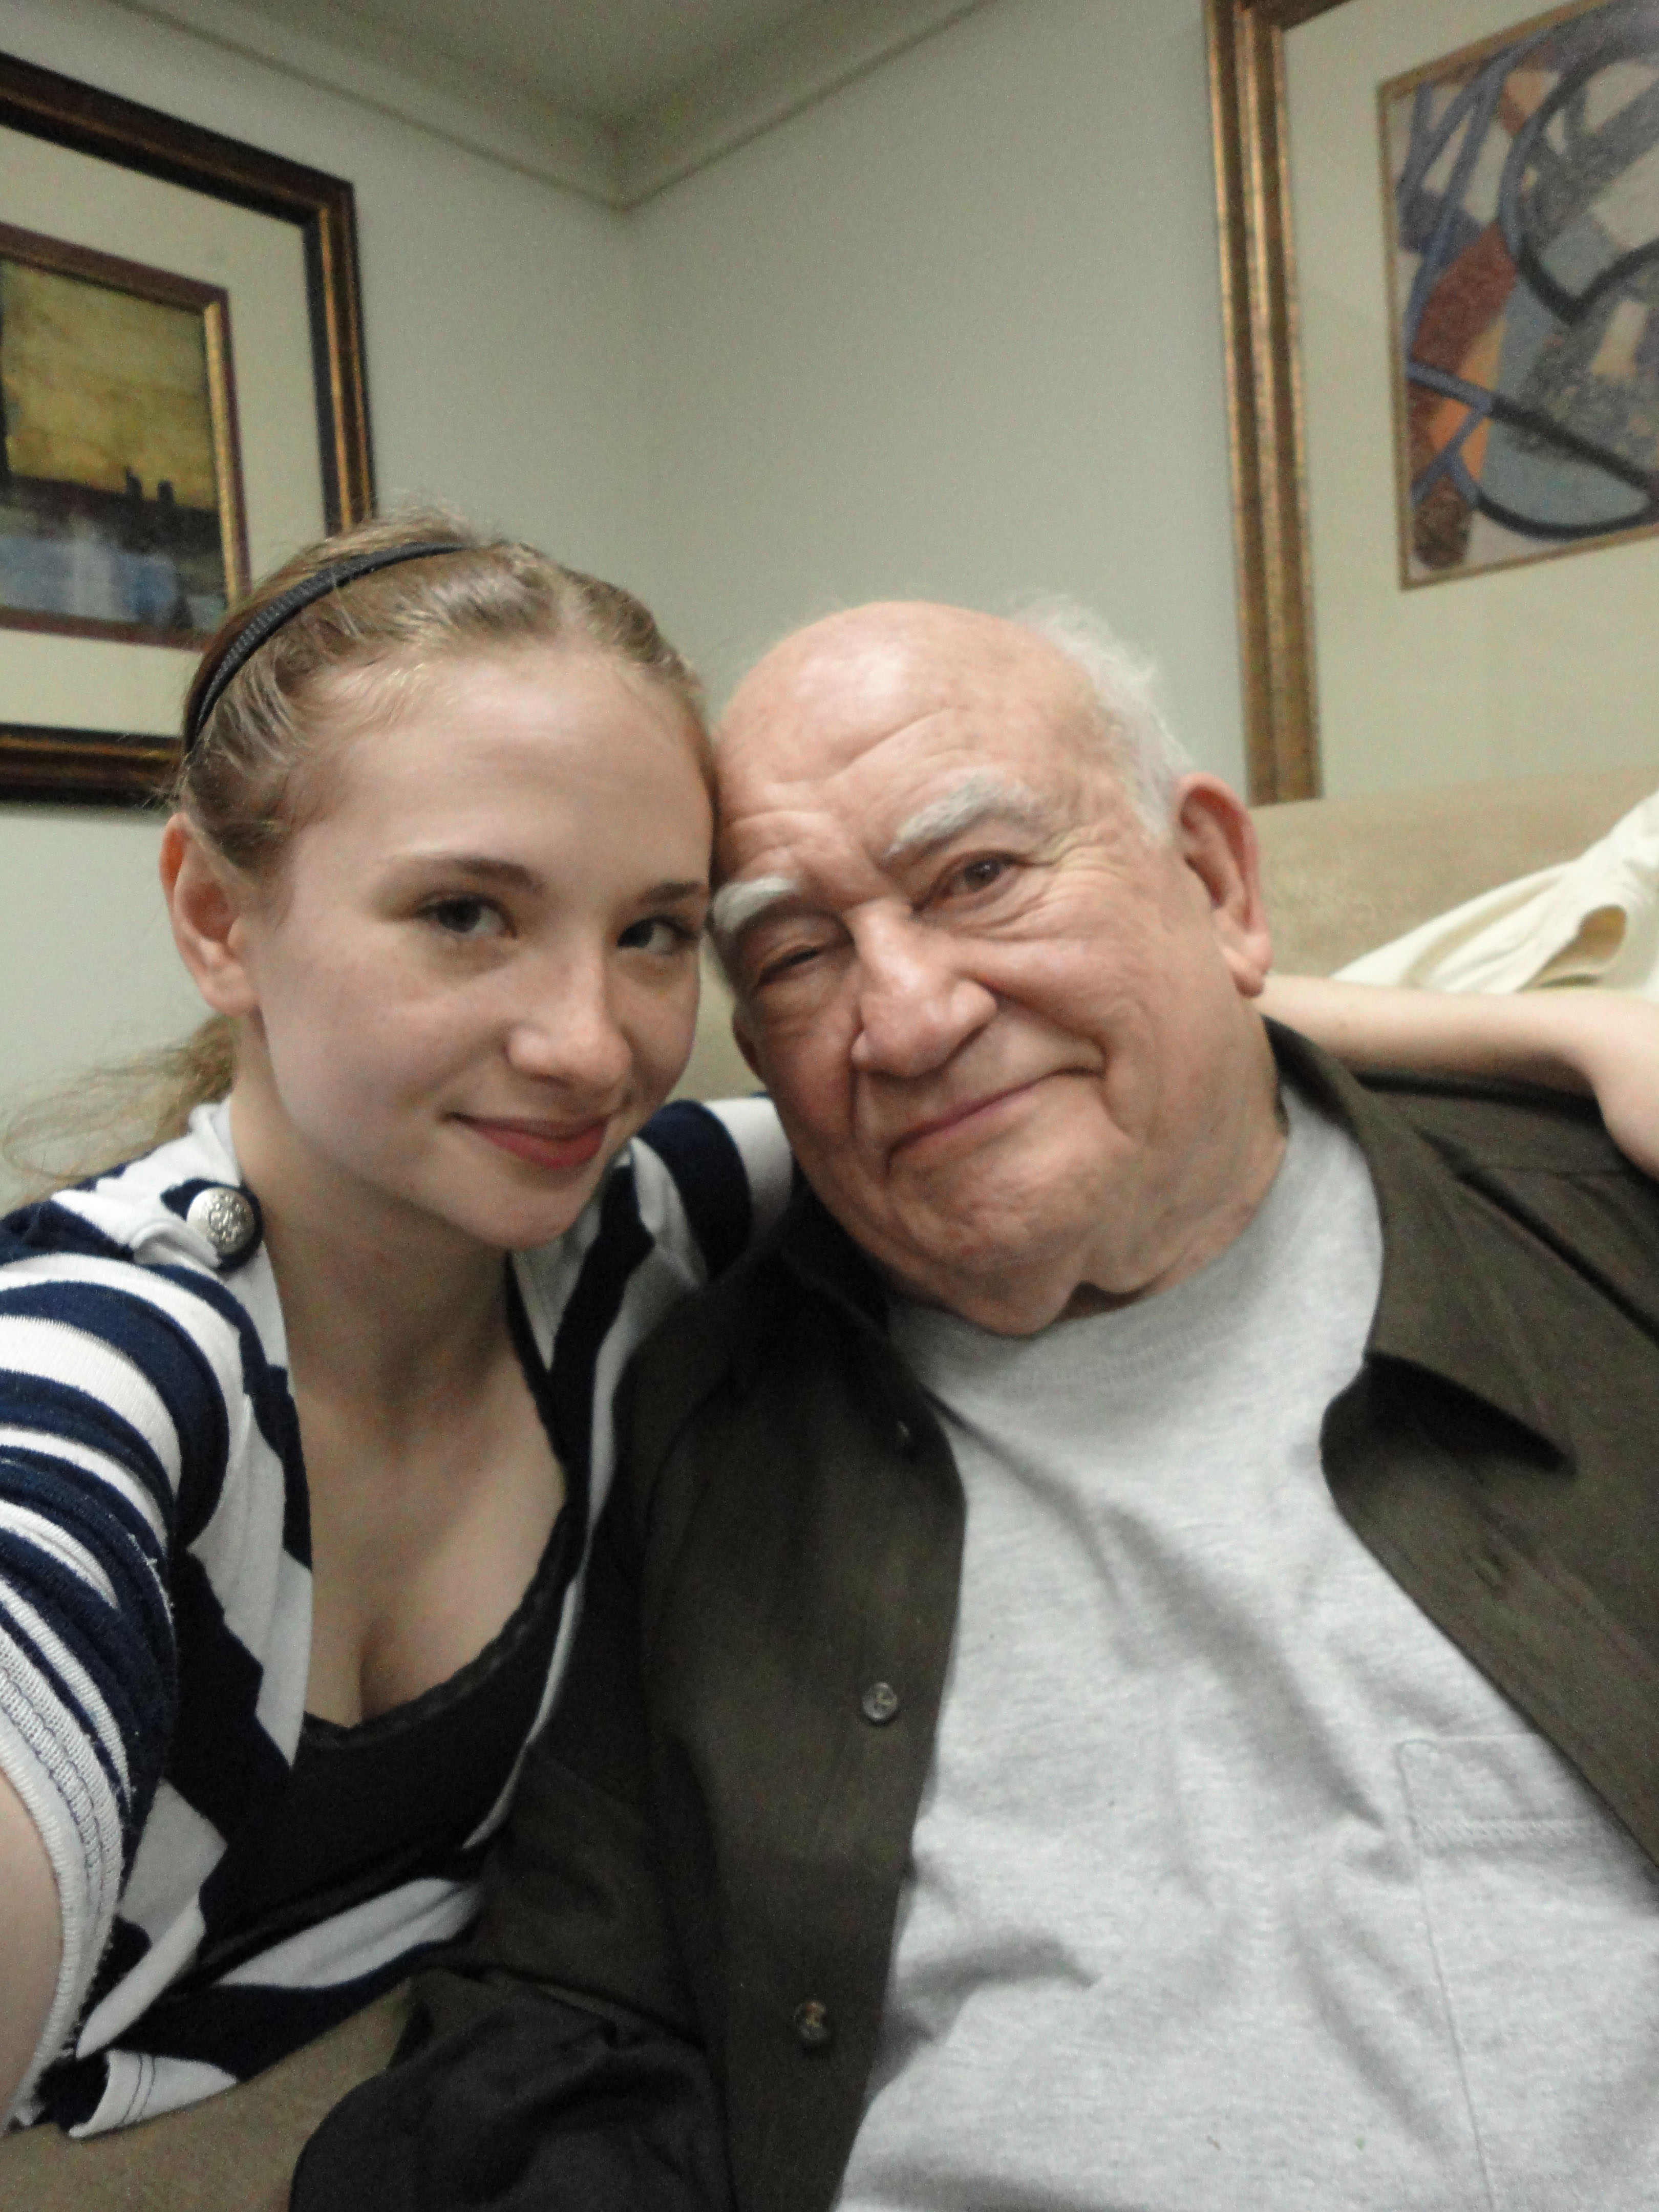 Courtney and Working Class Co-Star Ed Asner hanging out on set